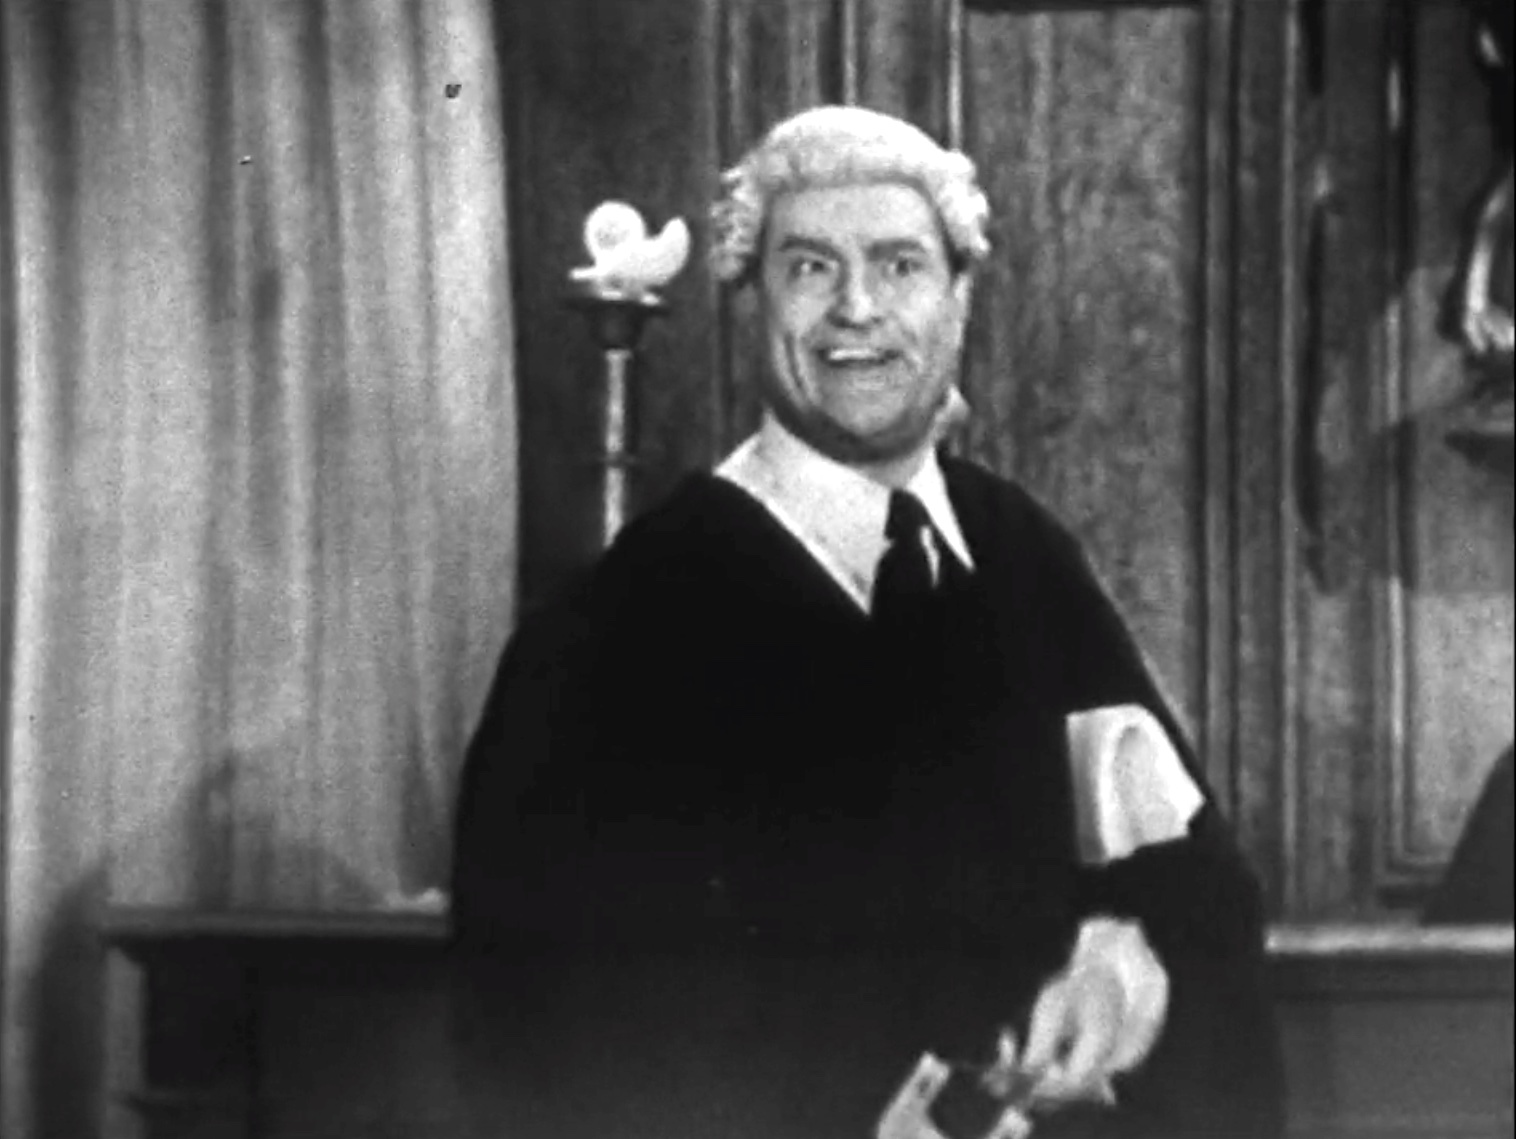 Red Skelton as Barrister Kelly in The Big Trial